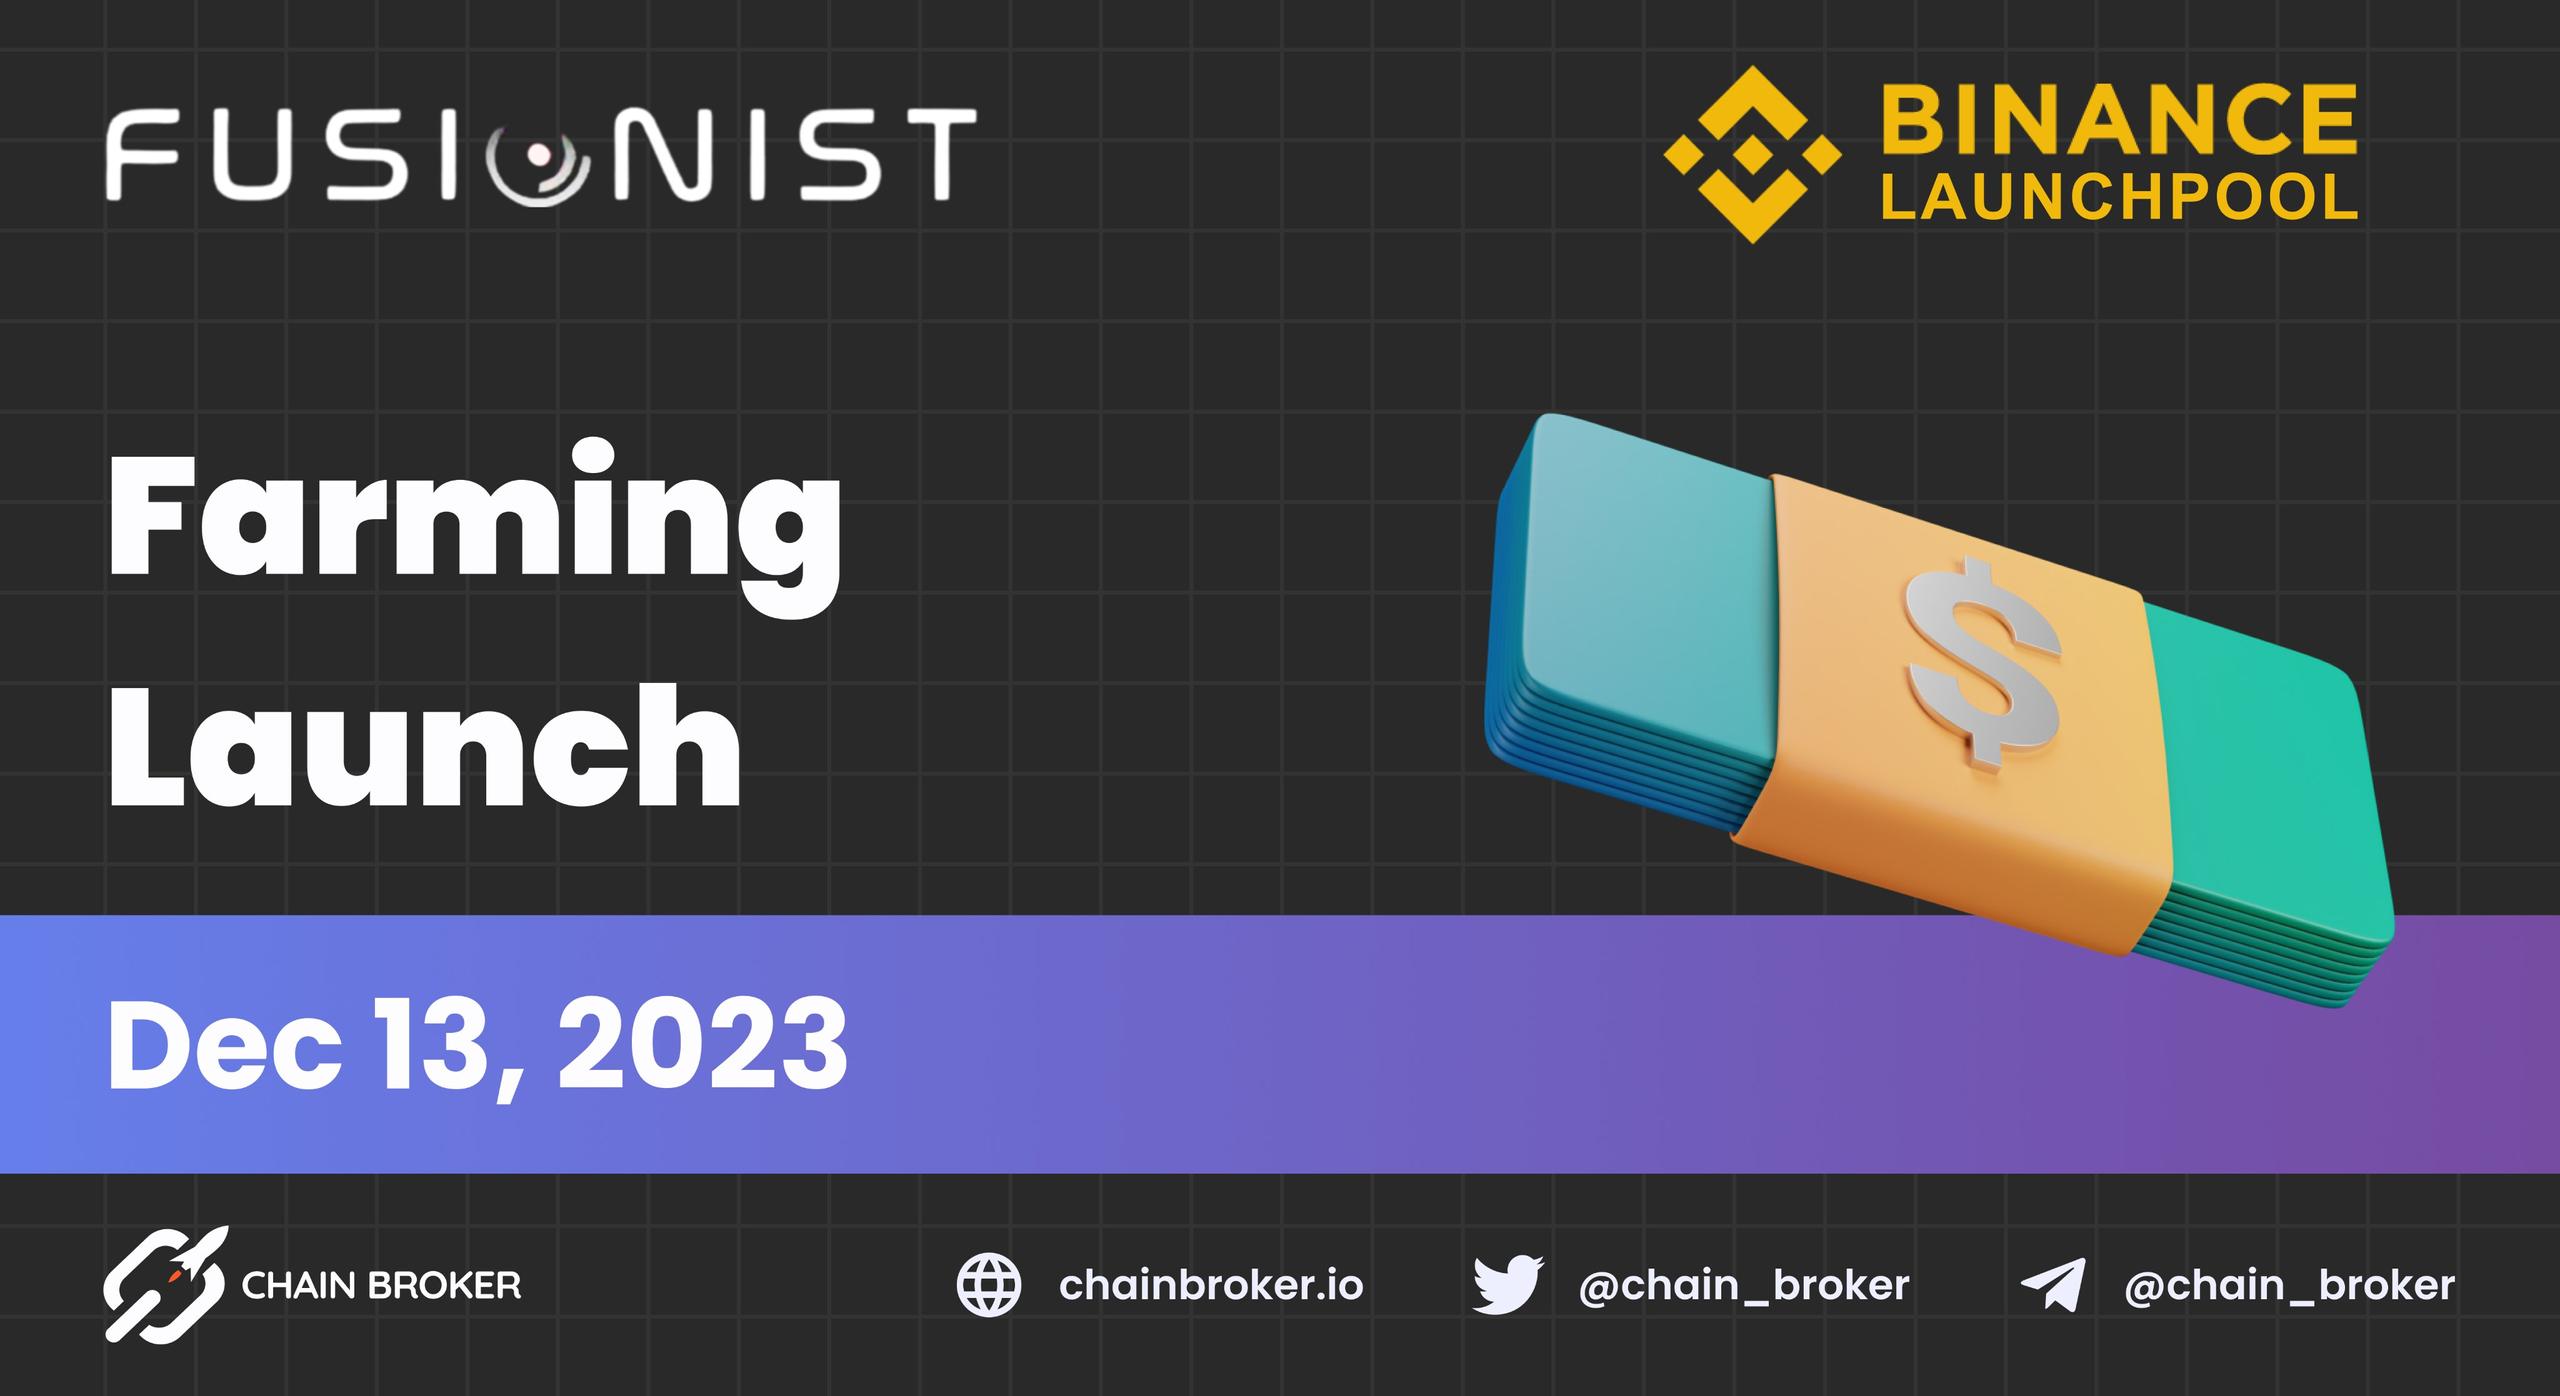 Fusionist (ACE) will be launched on Binance Launchpool